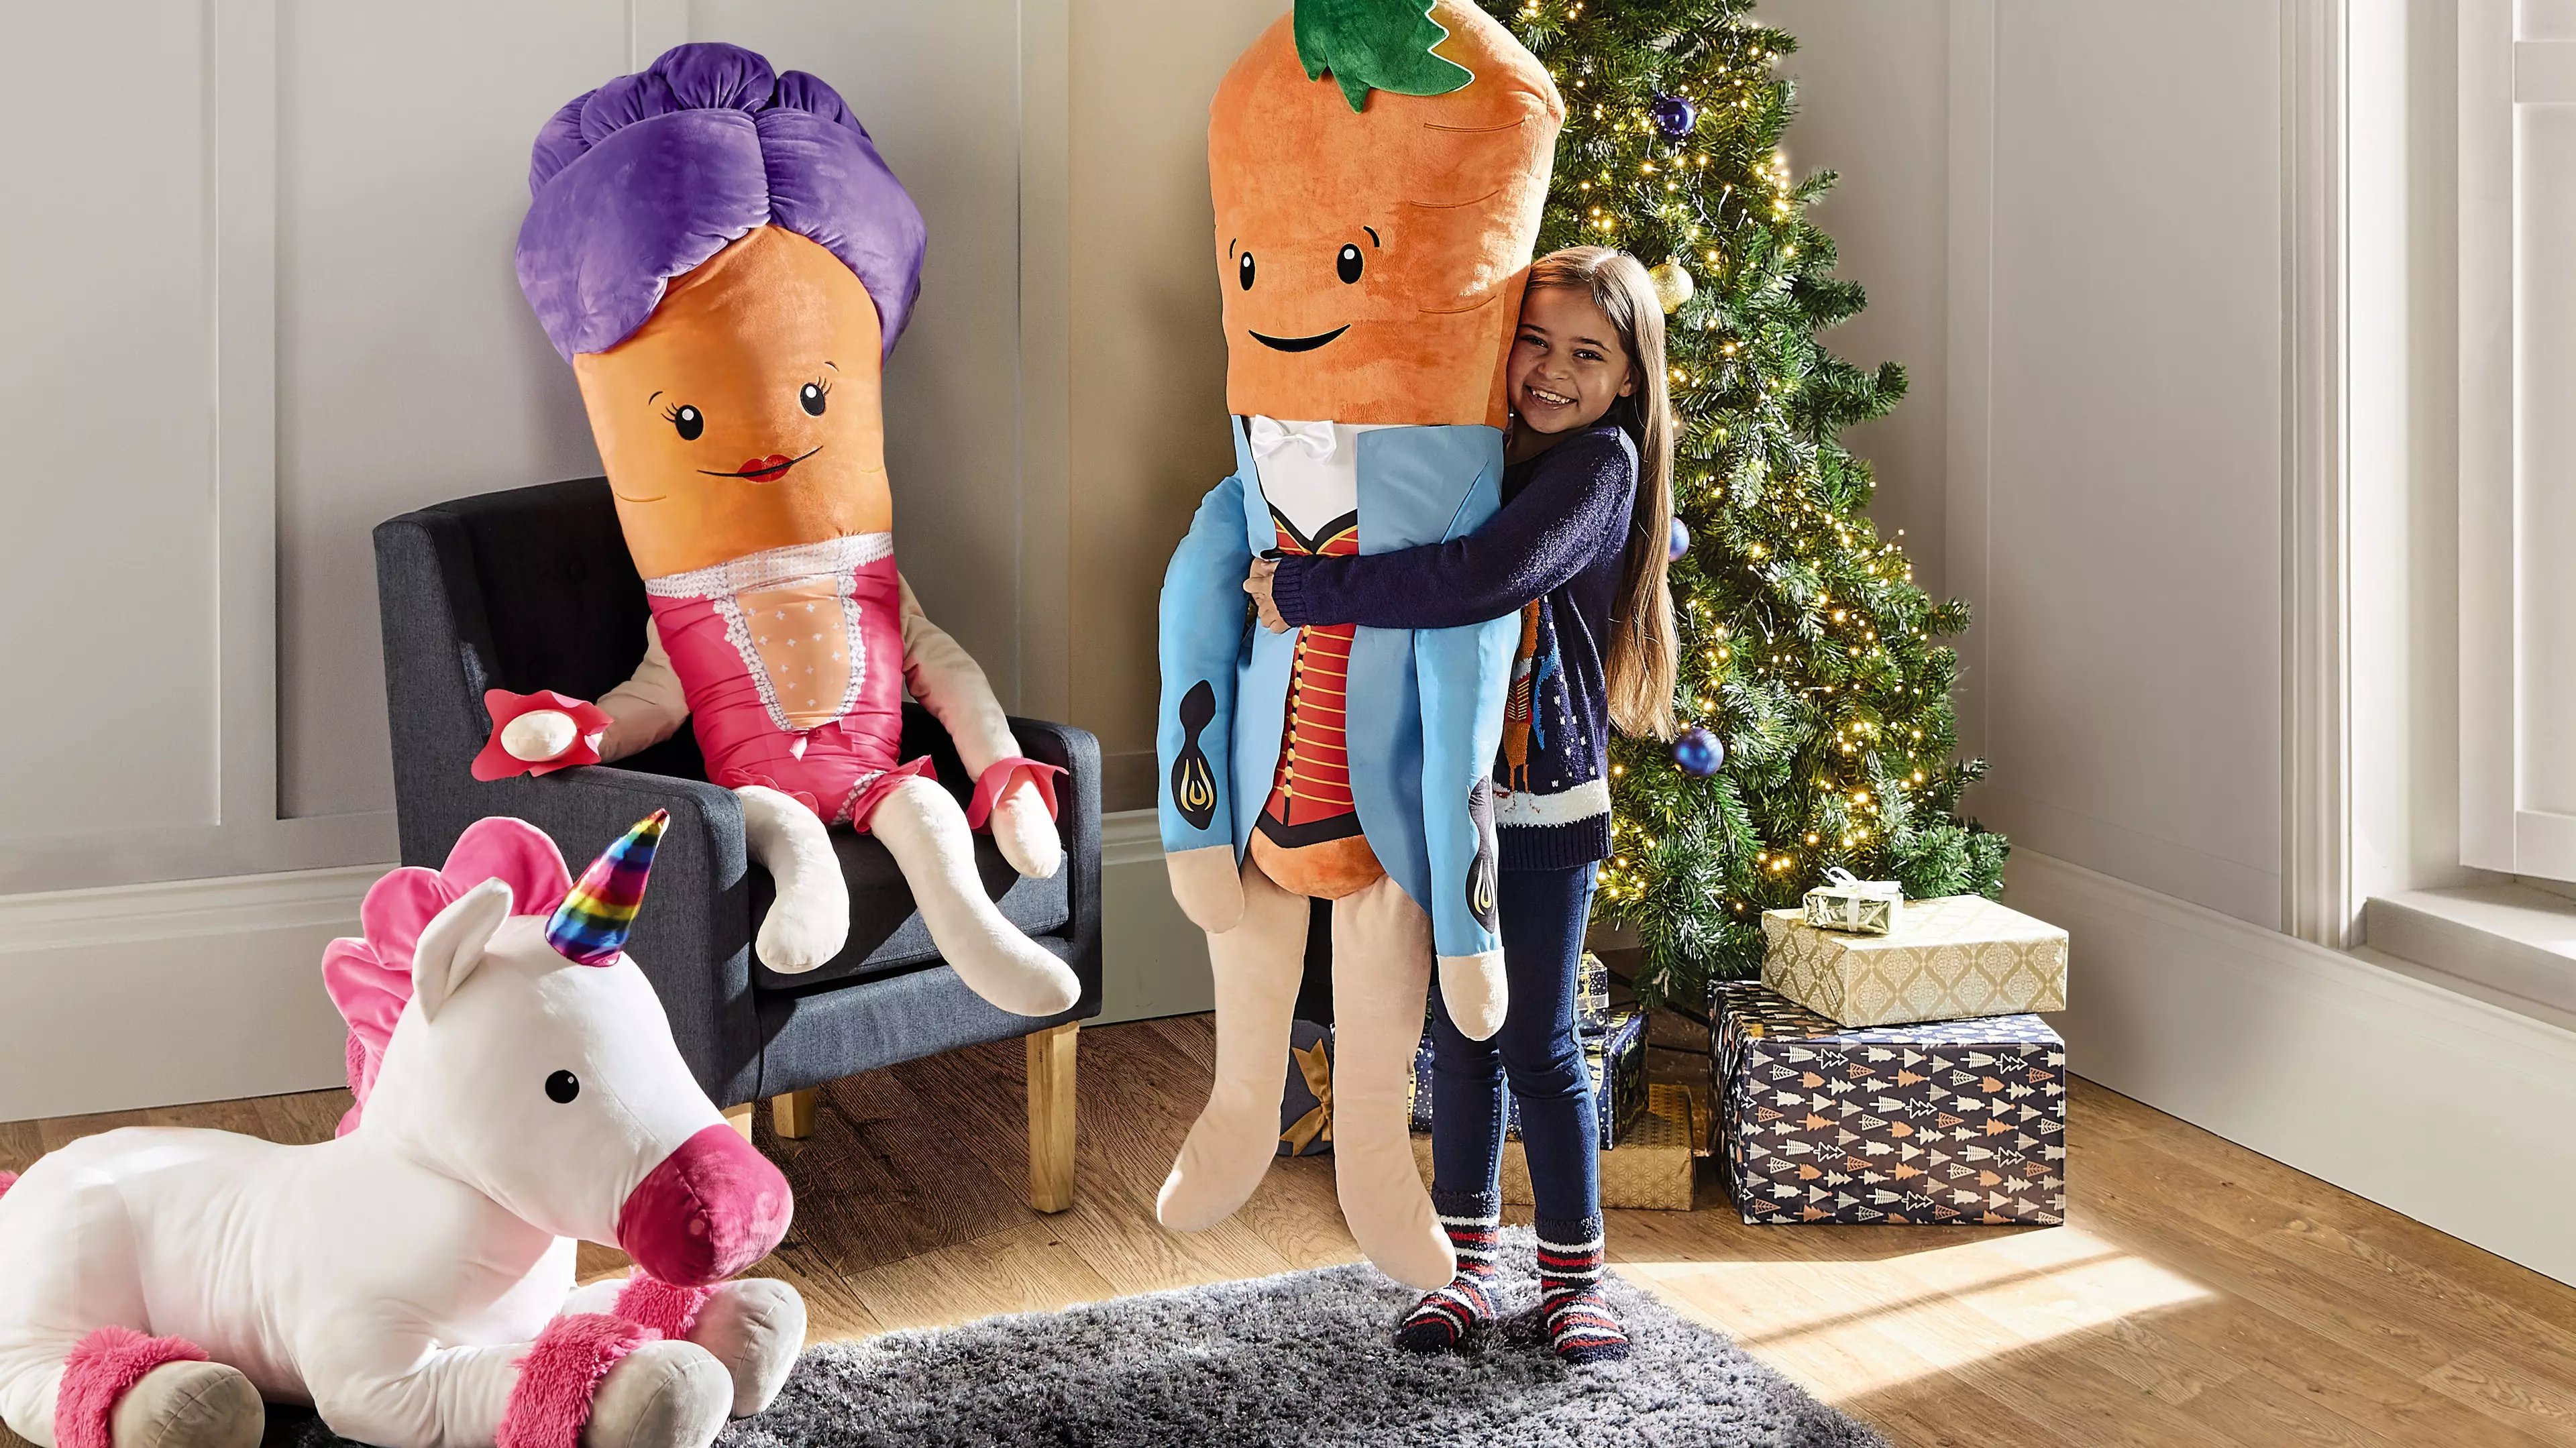 Aldi Has Announced The Much Awaited Return Of The Kevin The Carrot Soft Toys